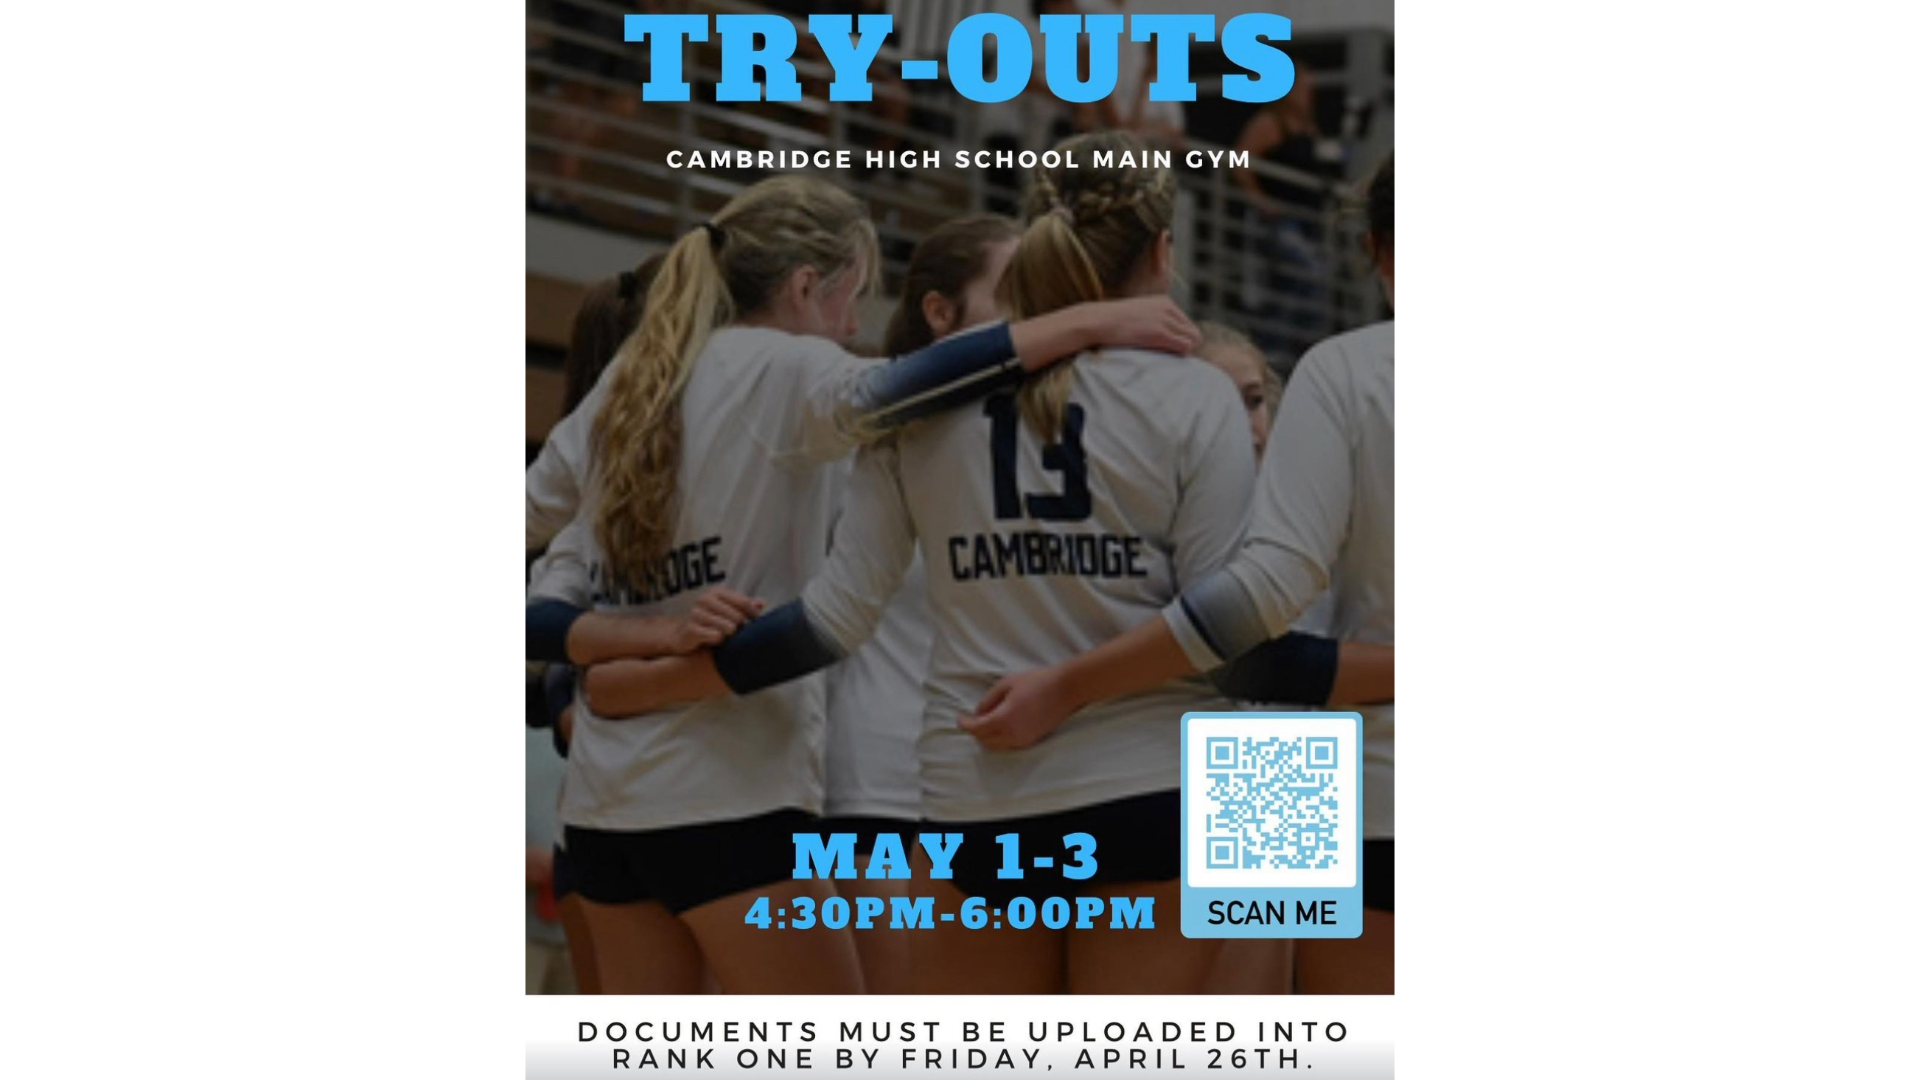 Volleyball Try Outs May 1-3rd. Rank One Forms due April 26th